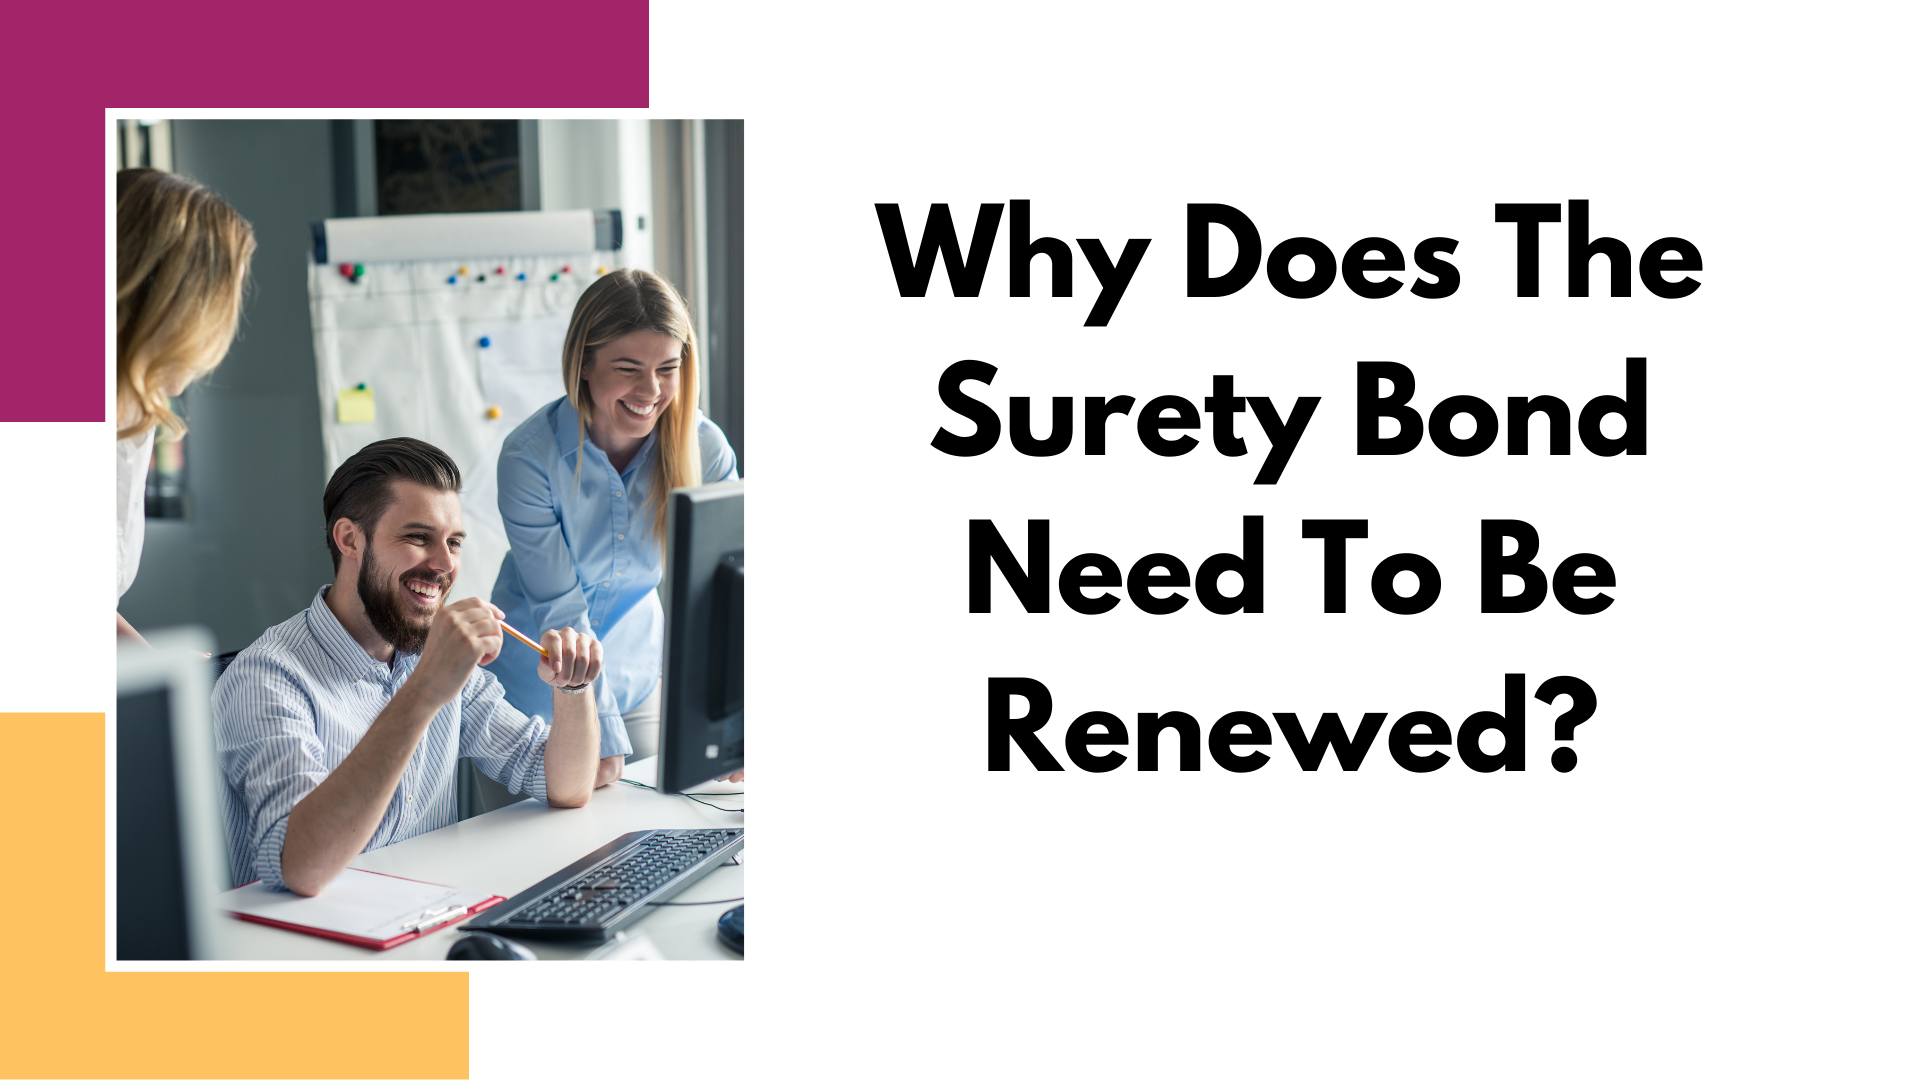 surety bond - Why do you need to renew your surety bond annually - working